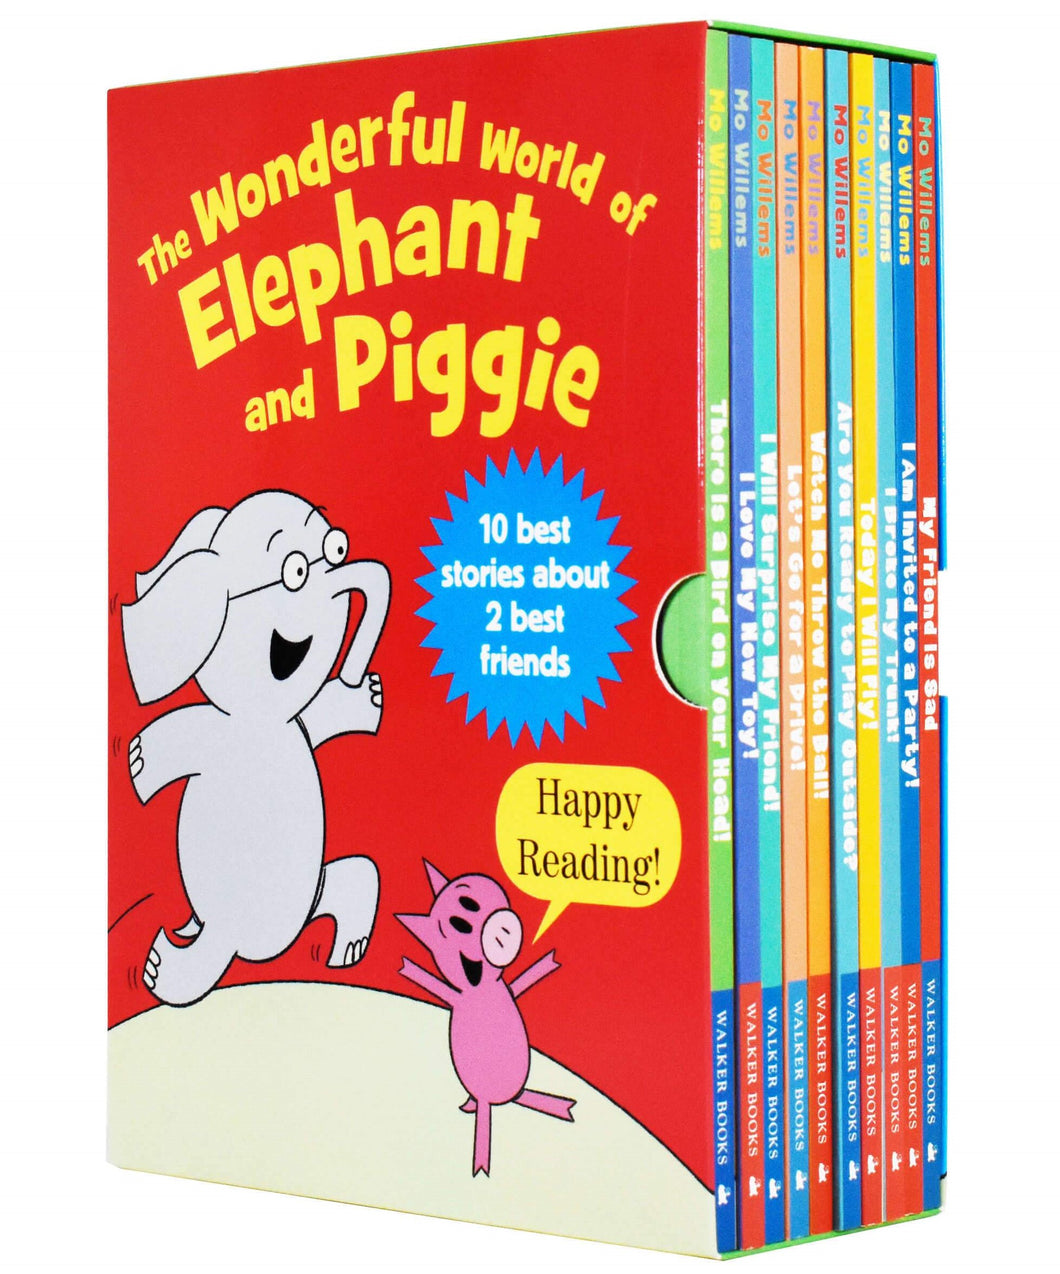 The Wonderful World of Elephant and Piggie Series by Mo Willems 10 Books Collection Box Set - Age 4+ - Paperback